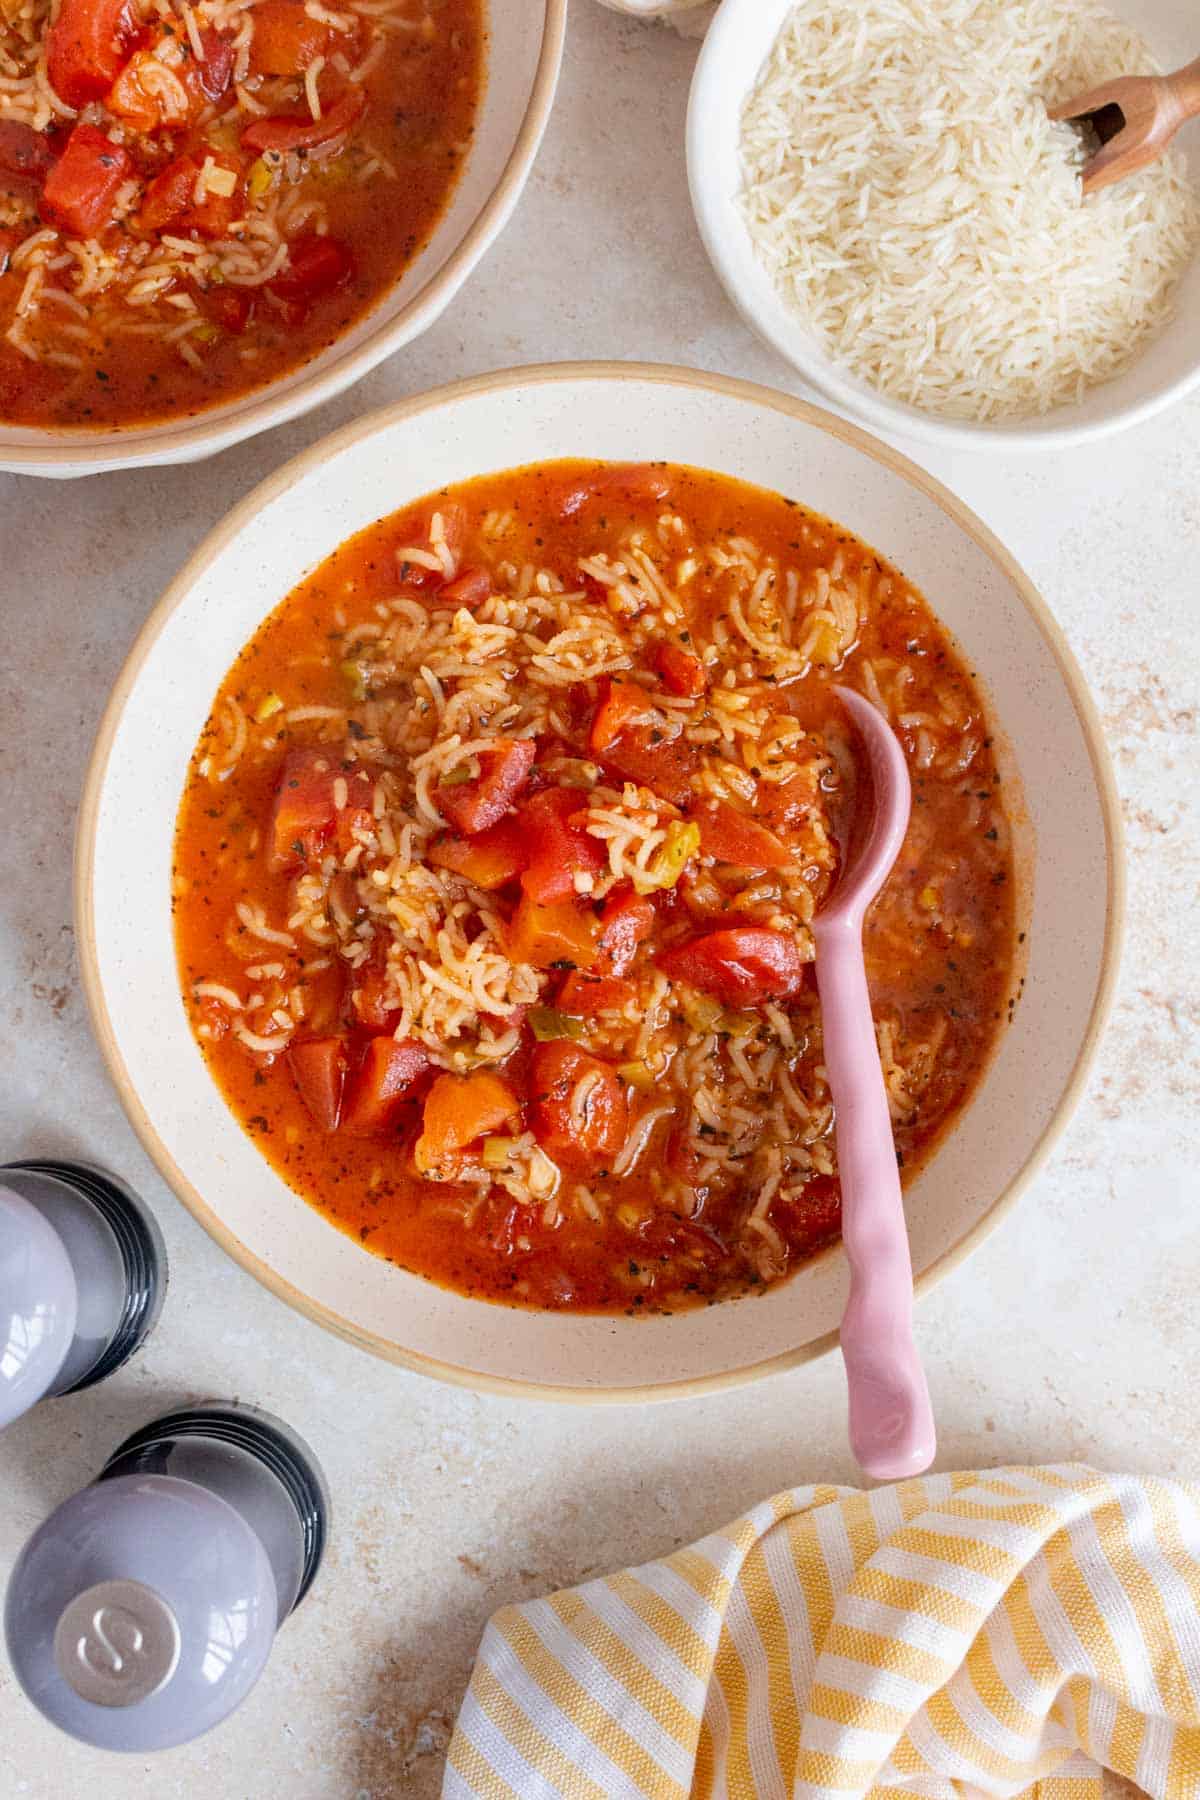 Overhead view of a bowl of tomato rice soup with a spoon. A towel, salt and pepper shakers, a second bowl of soup, and some rice off to the side.